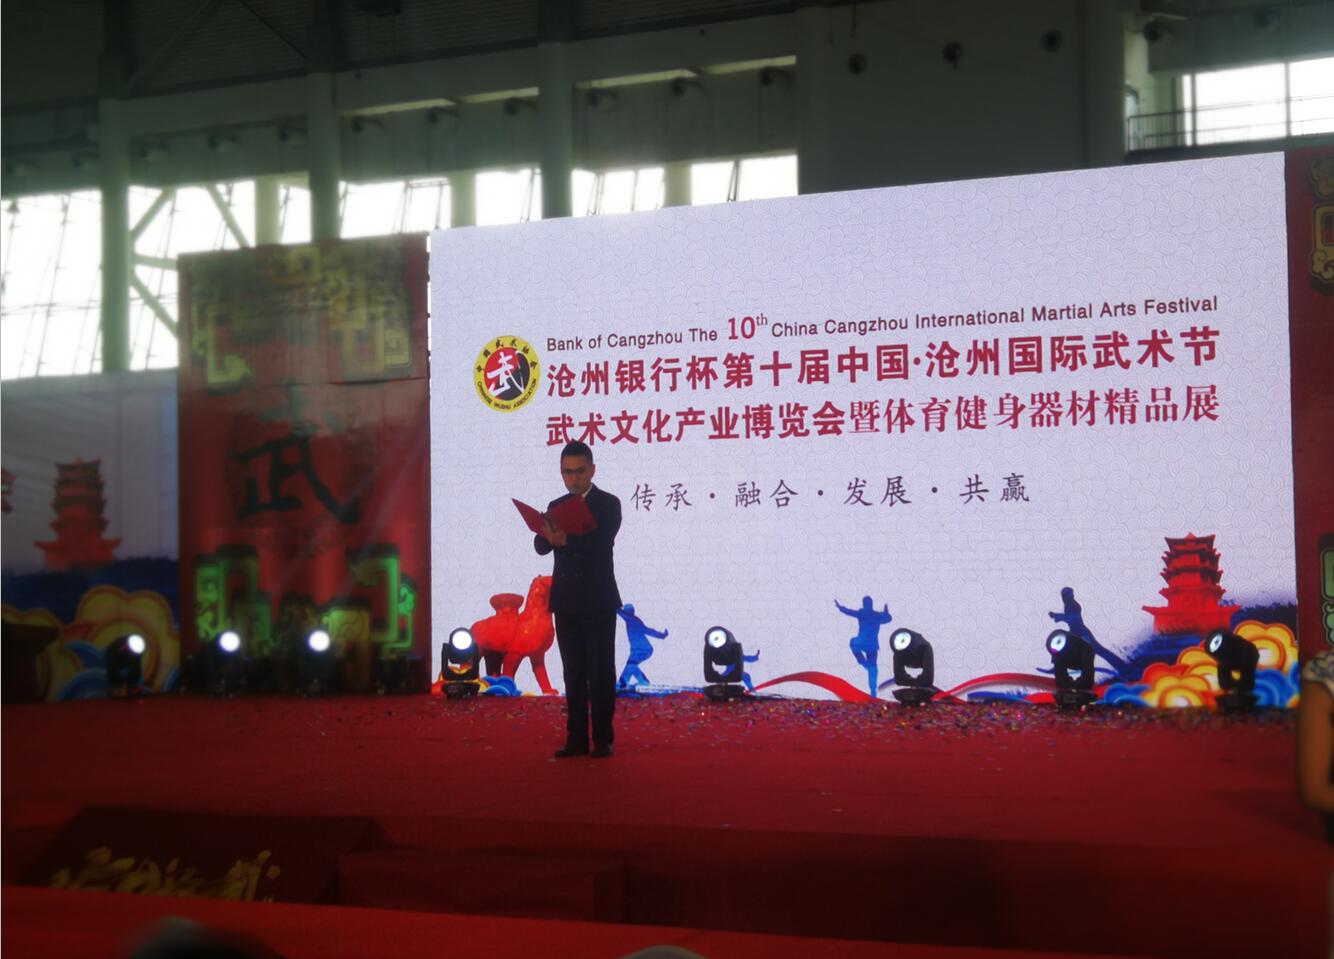 In 2018, the 10th China Cangzhou Wushu Festival, Hongkang was invited to participate in the exhibition